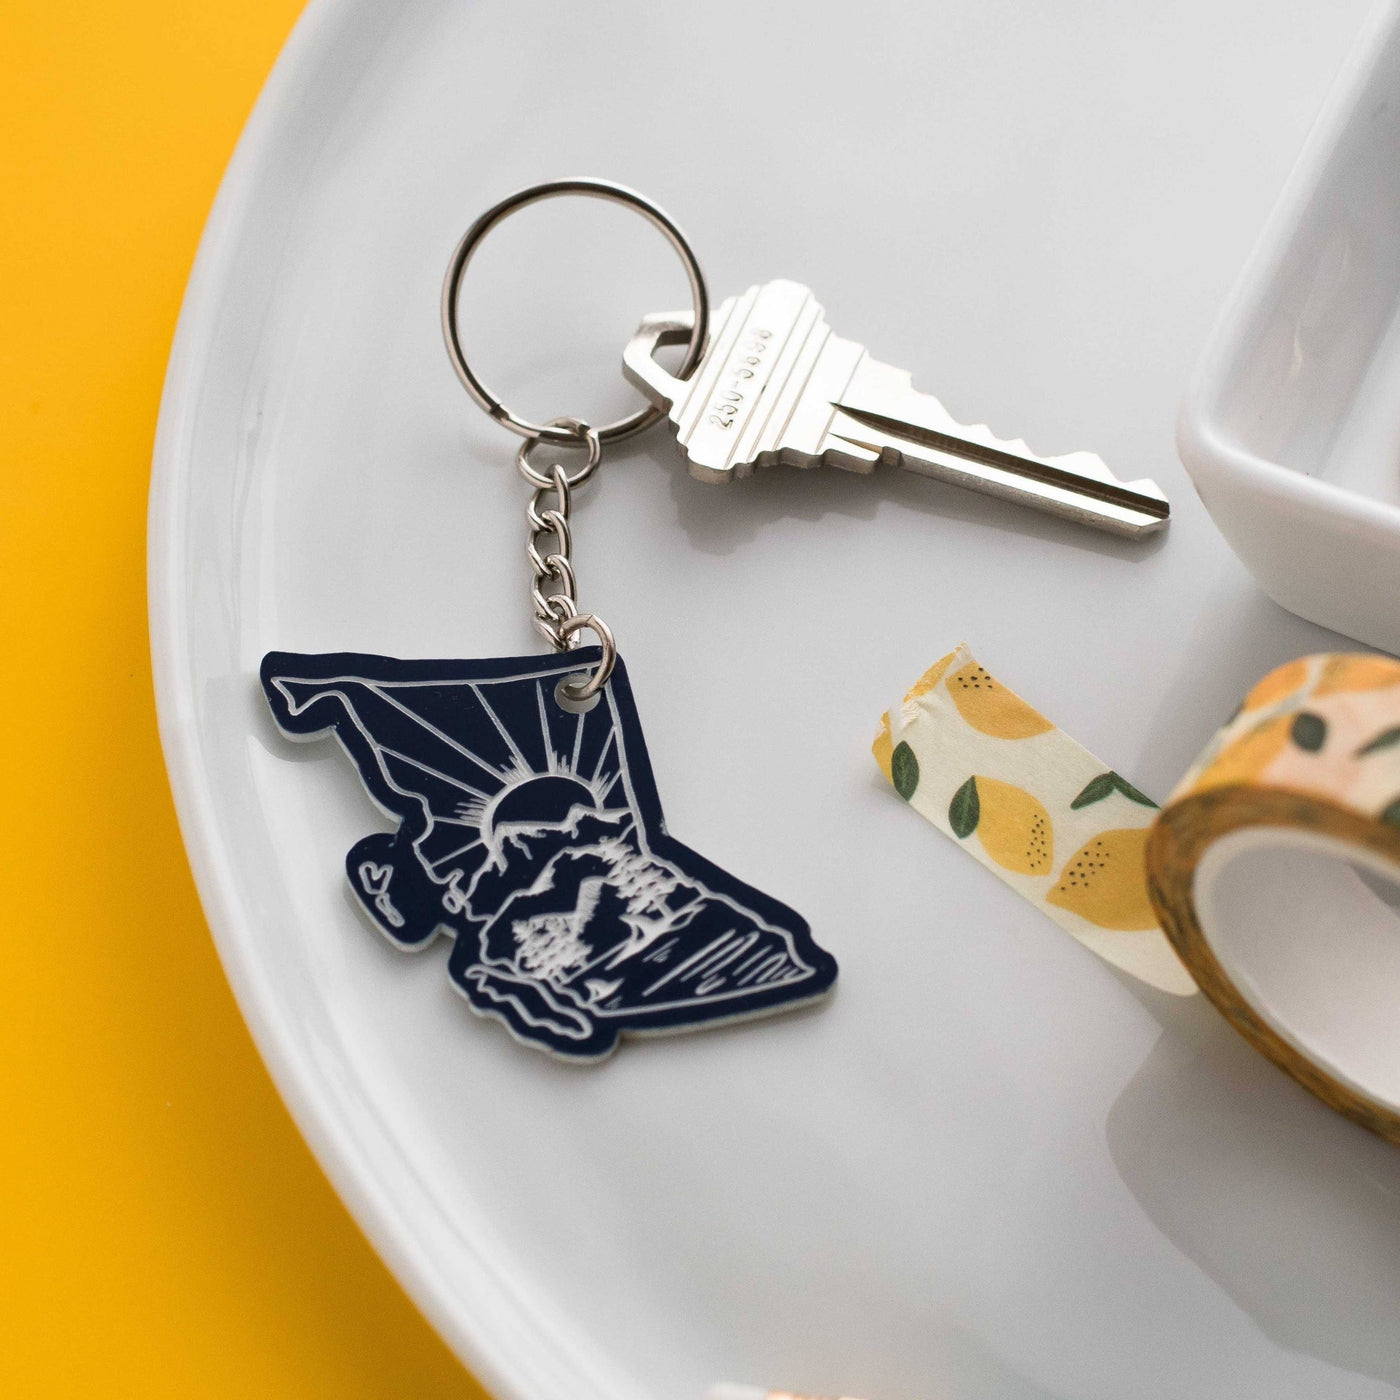 Jaybee Designs | British Columbia Navy Keychain, The Local Space, Local Canadian Brands